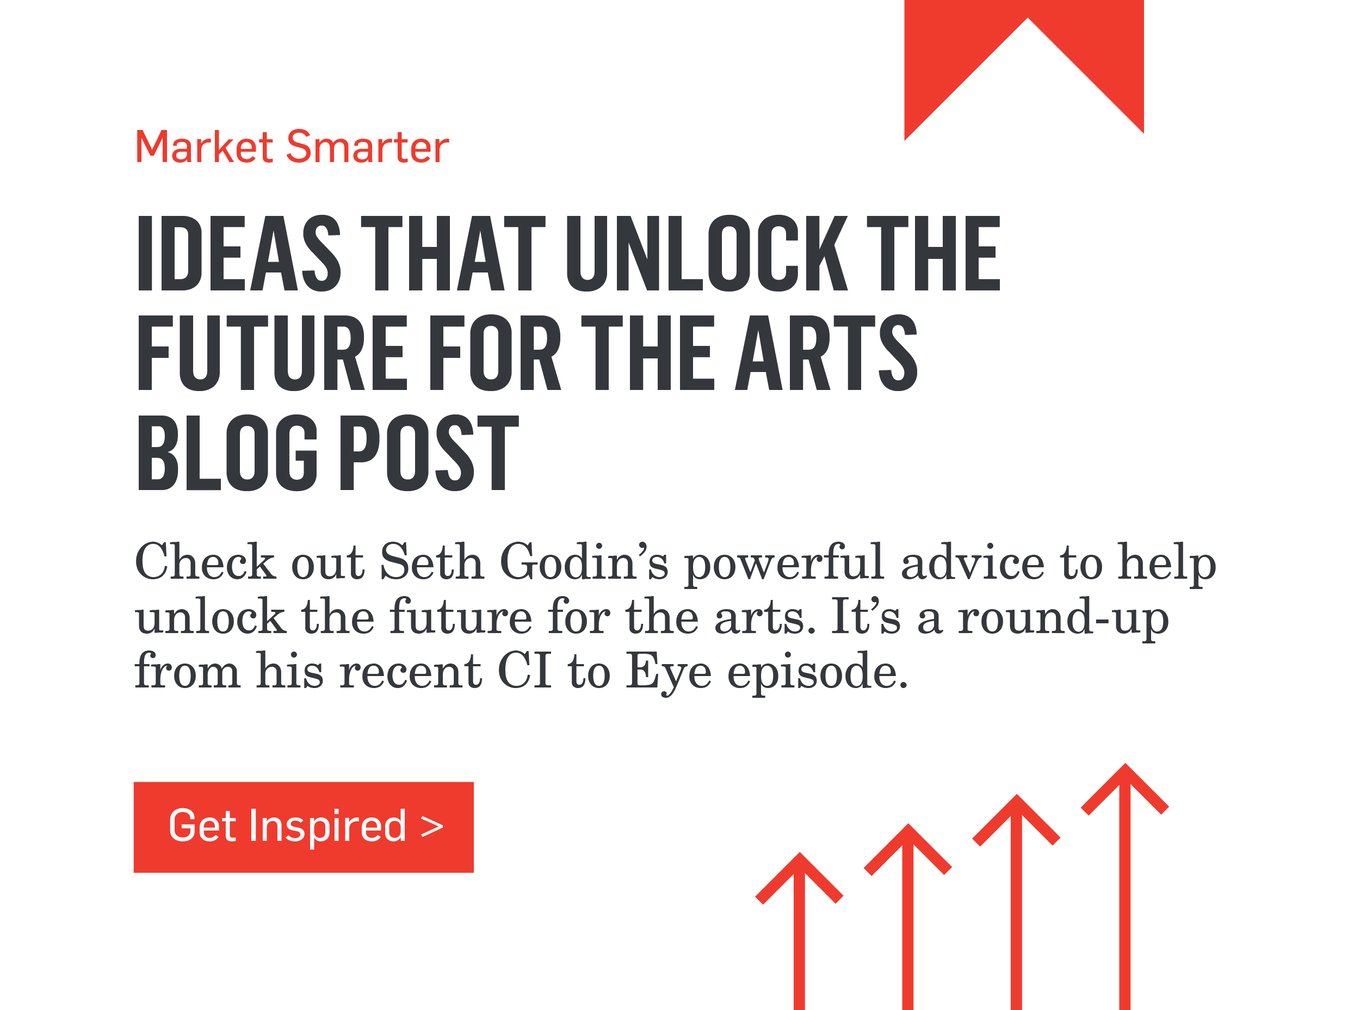 Market Smarter - IDEAS THAT UNLOCK THE FUTURE FOR THE ARTS BLOG POST - Check out Seth Godin's powerful advice to help unlock the future for the arts. It's a round-up from his recent CI to Eye episode. >>>Get Inspired>>>